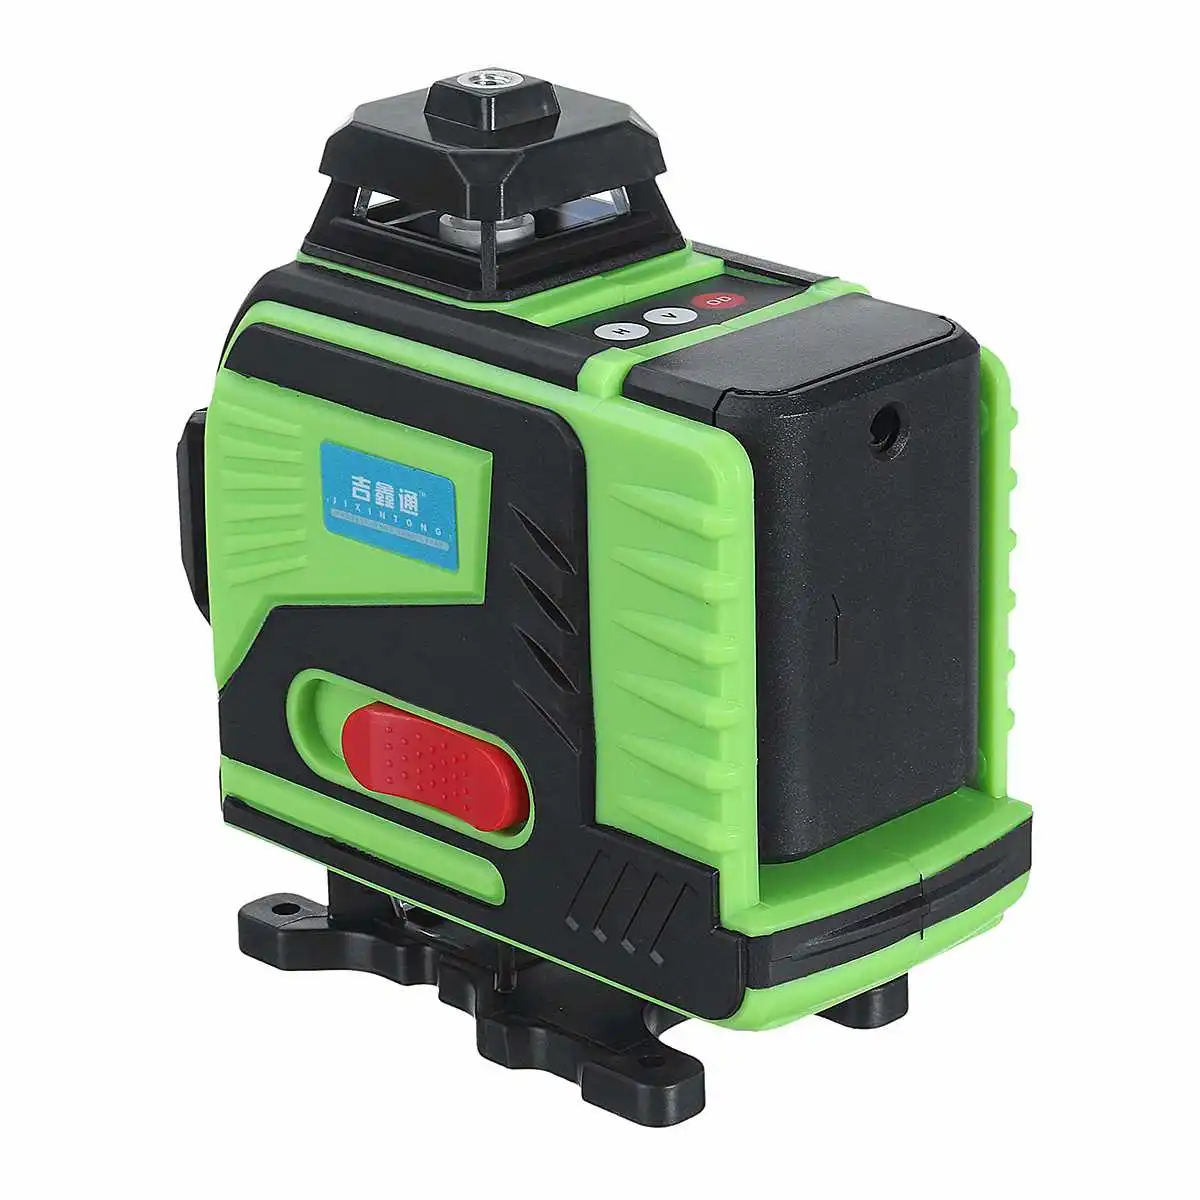 Es green laser levels 360 horizontal vertical cross lines with auto self leveling super thumb200